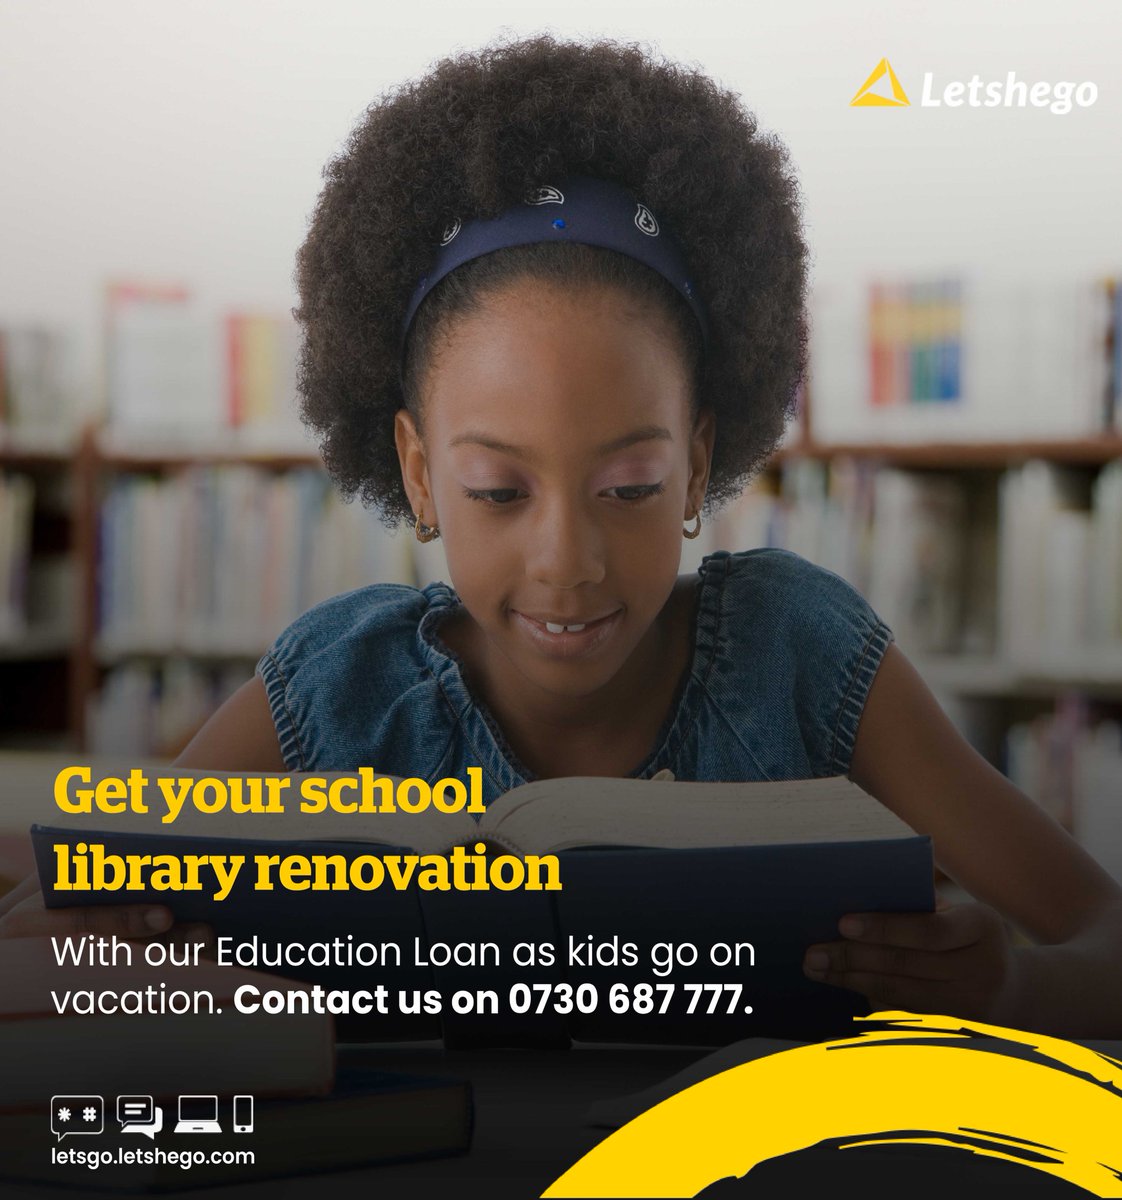 As kids go on holiday, get to revamp of your school library. Get our Education Loan of up to KShs. 10 Million with flexible repayment options of 3 - 48 months. Apply today, contact us on 0730 687 777 or visit your nearest branch. #EducationPlan #Letshego